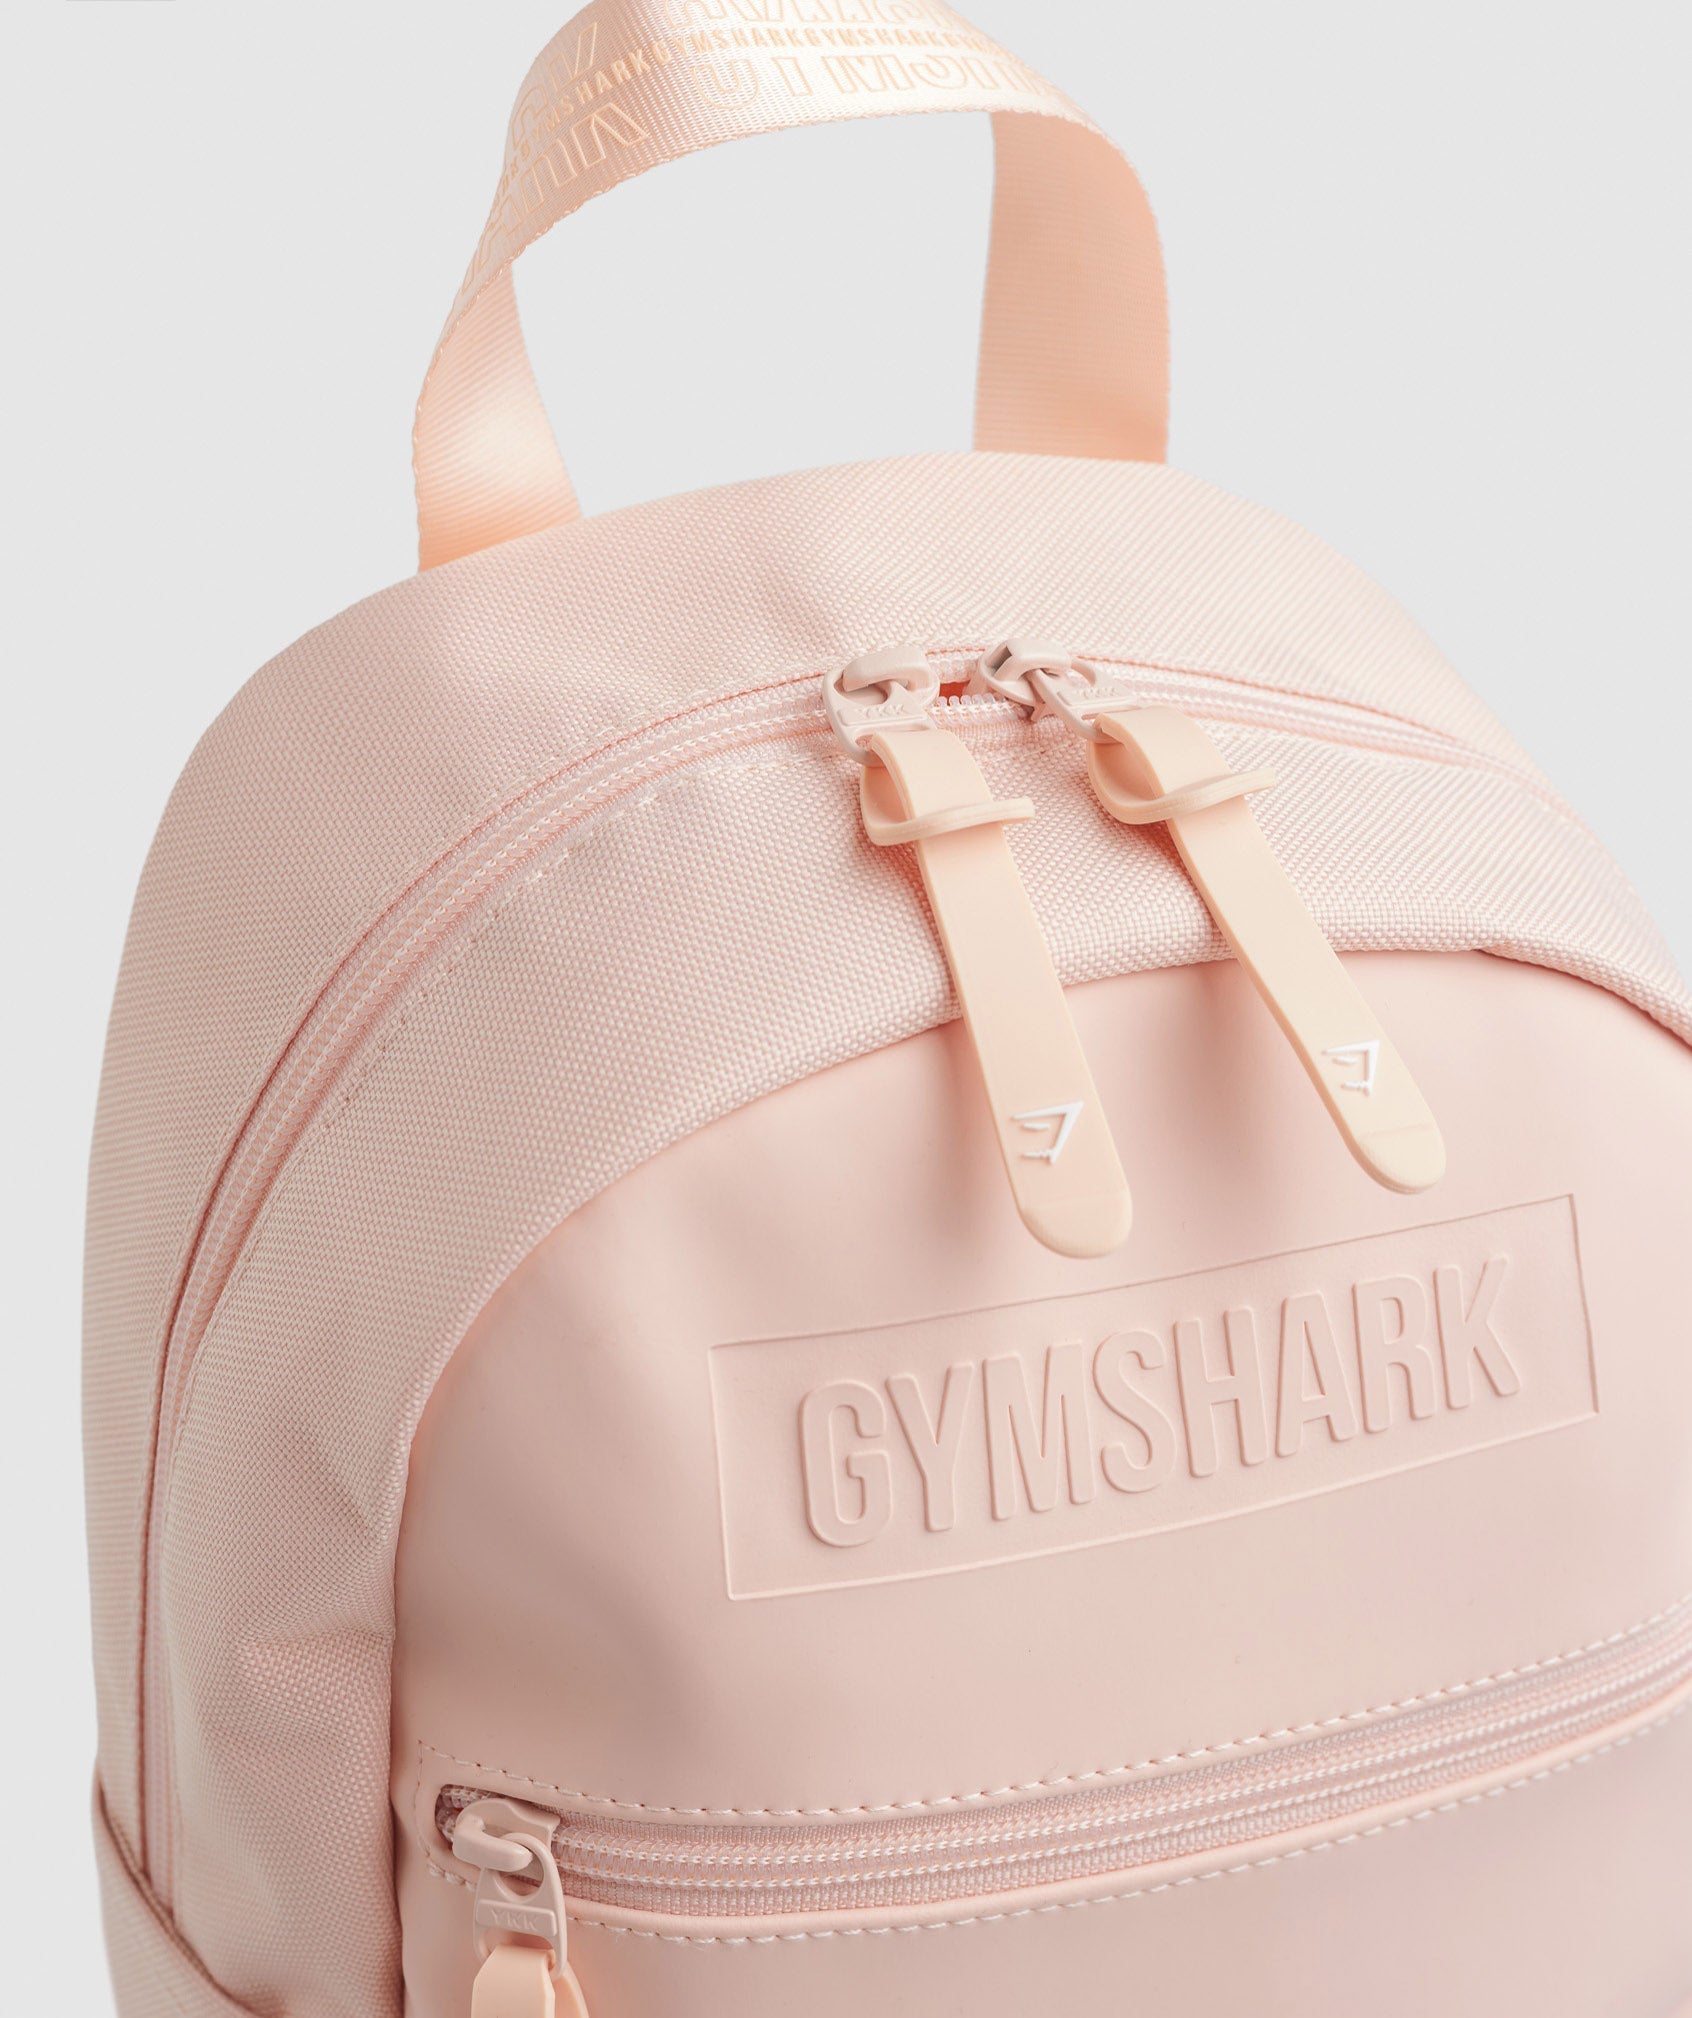 GYMSHARK EVERYDAY MINI BACKPACK, Gymshark Review 2021: Accessories Haul